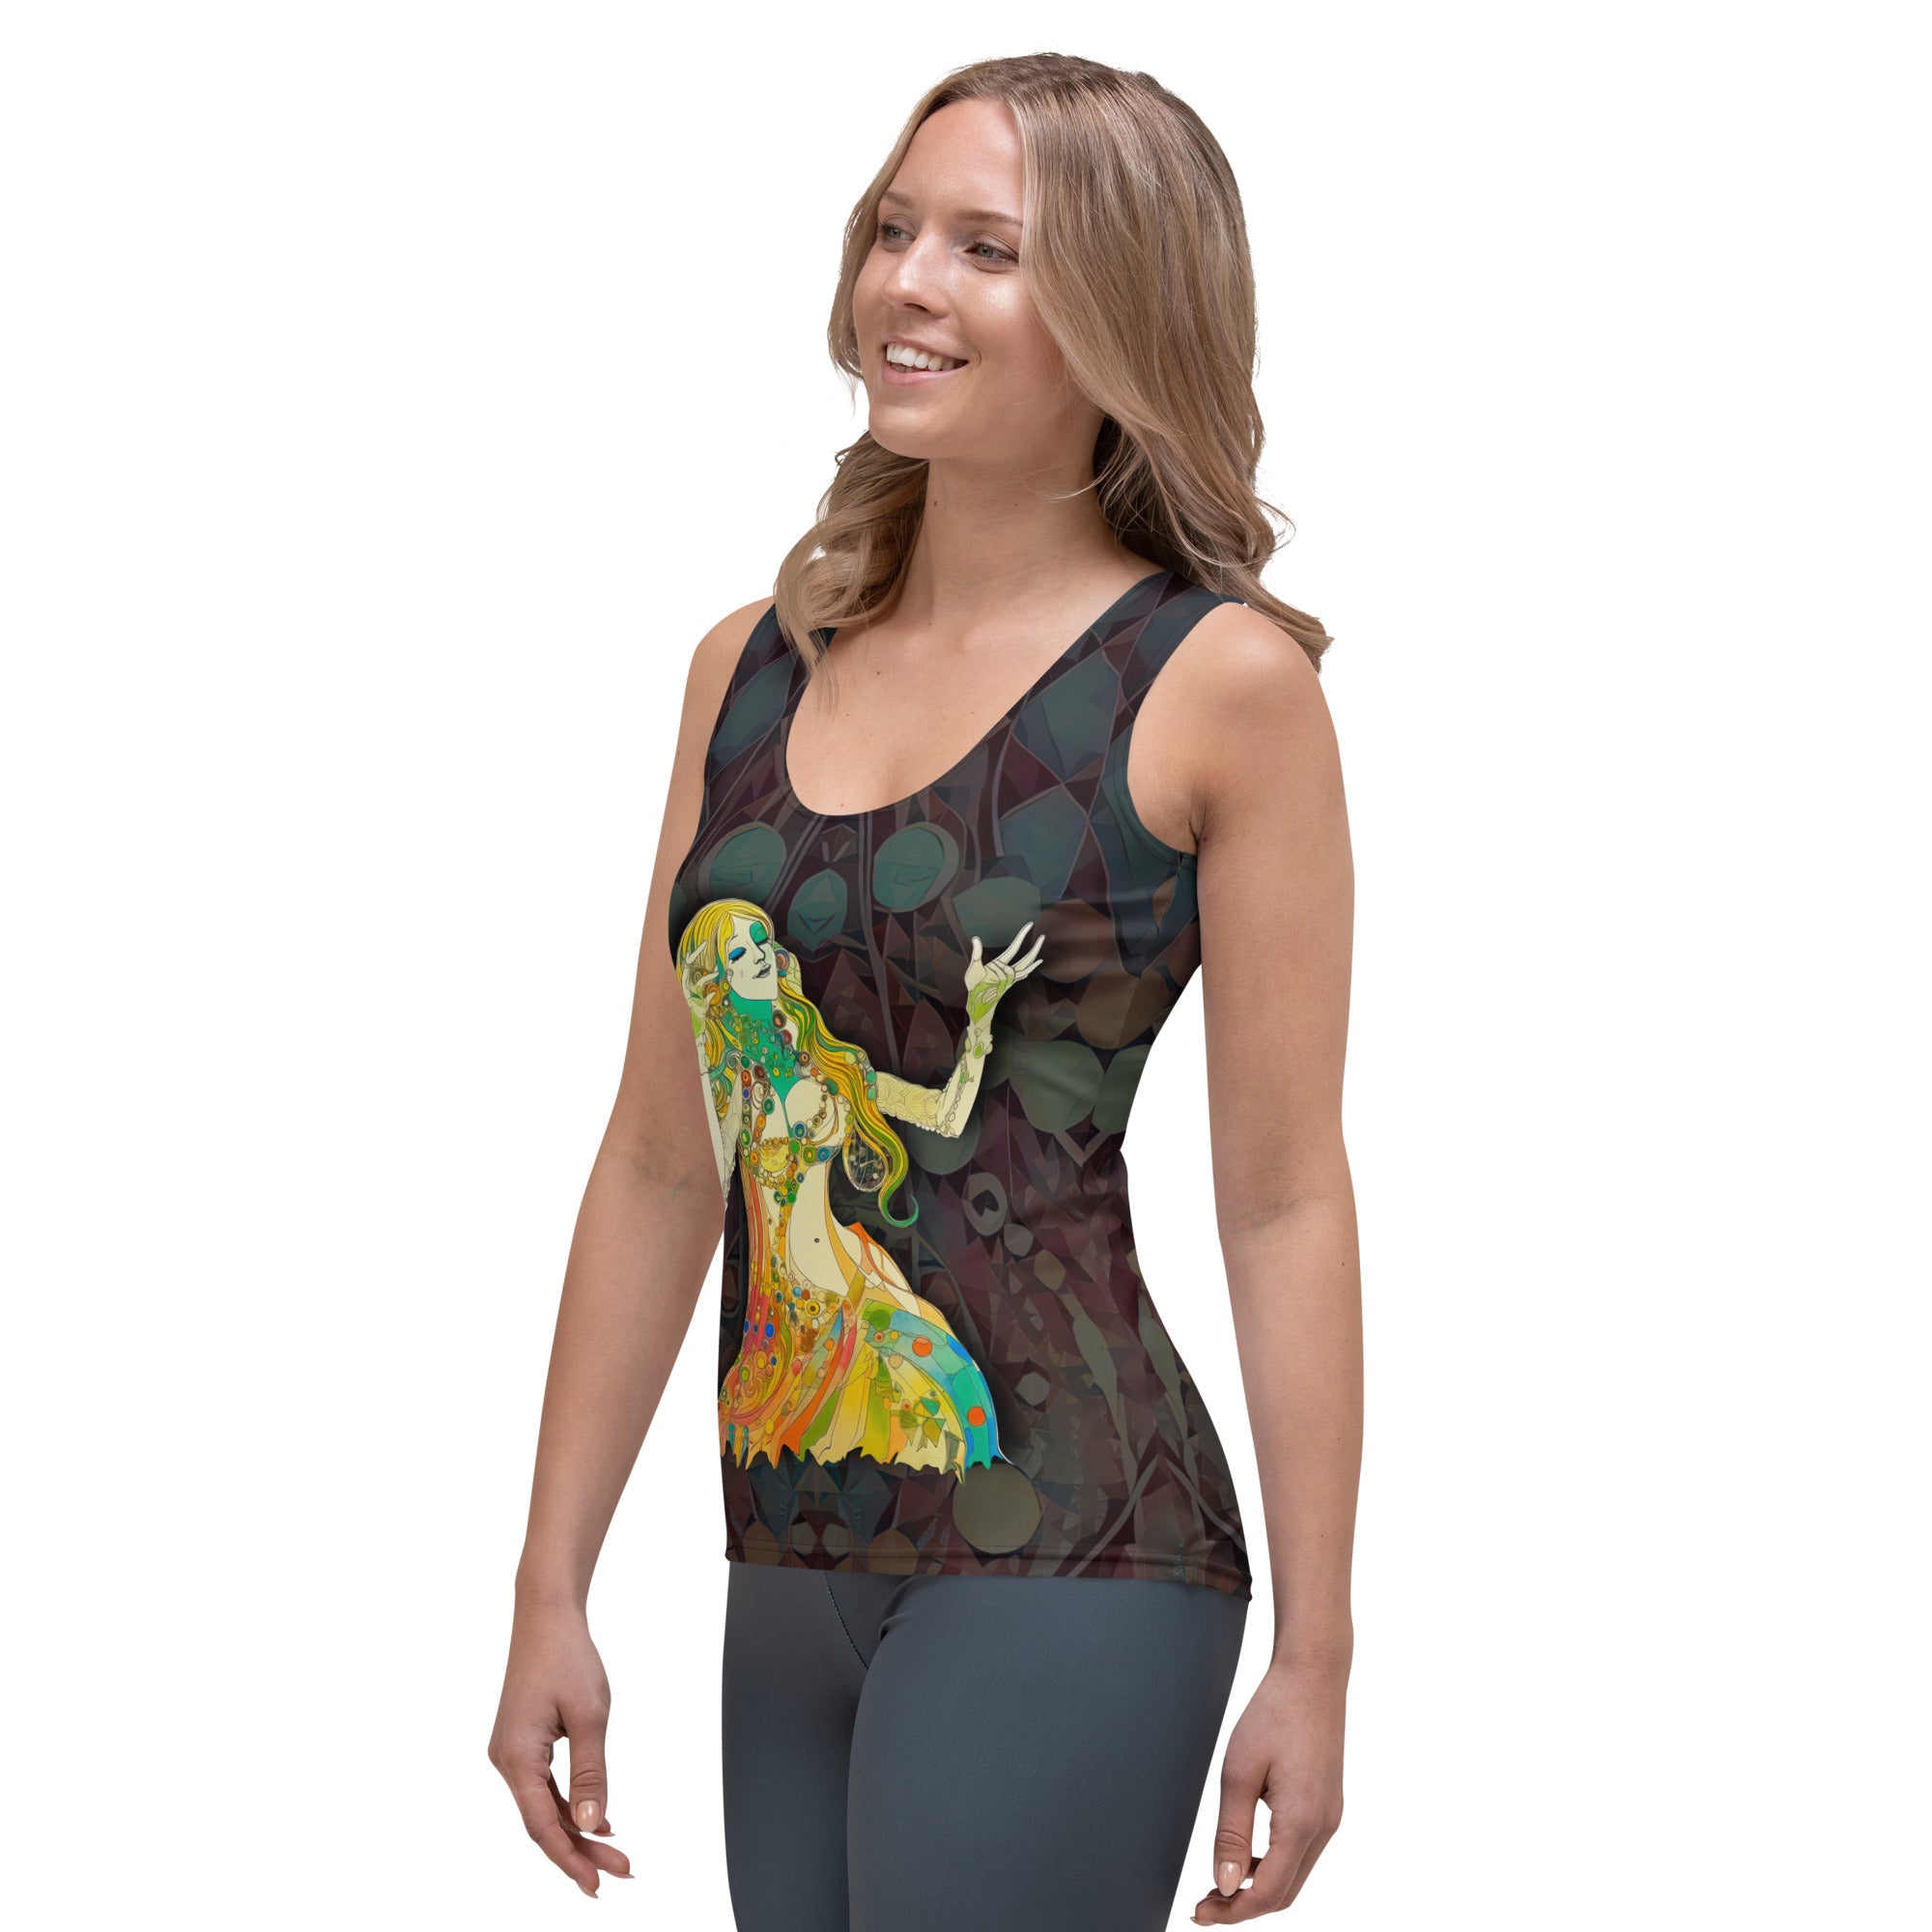 Wildflowers Whimsy Women's Tank Top Floral Print Close-Up.